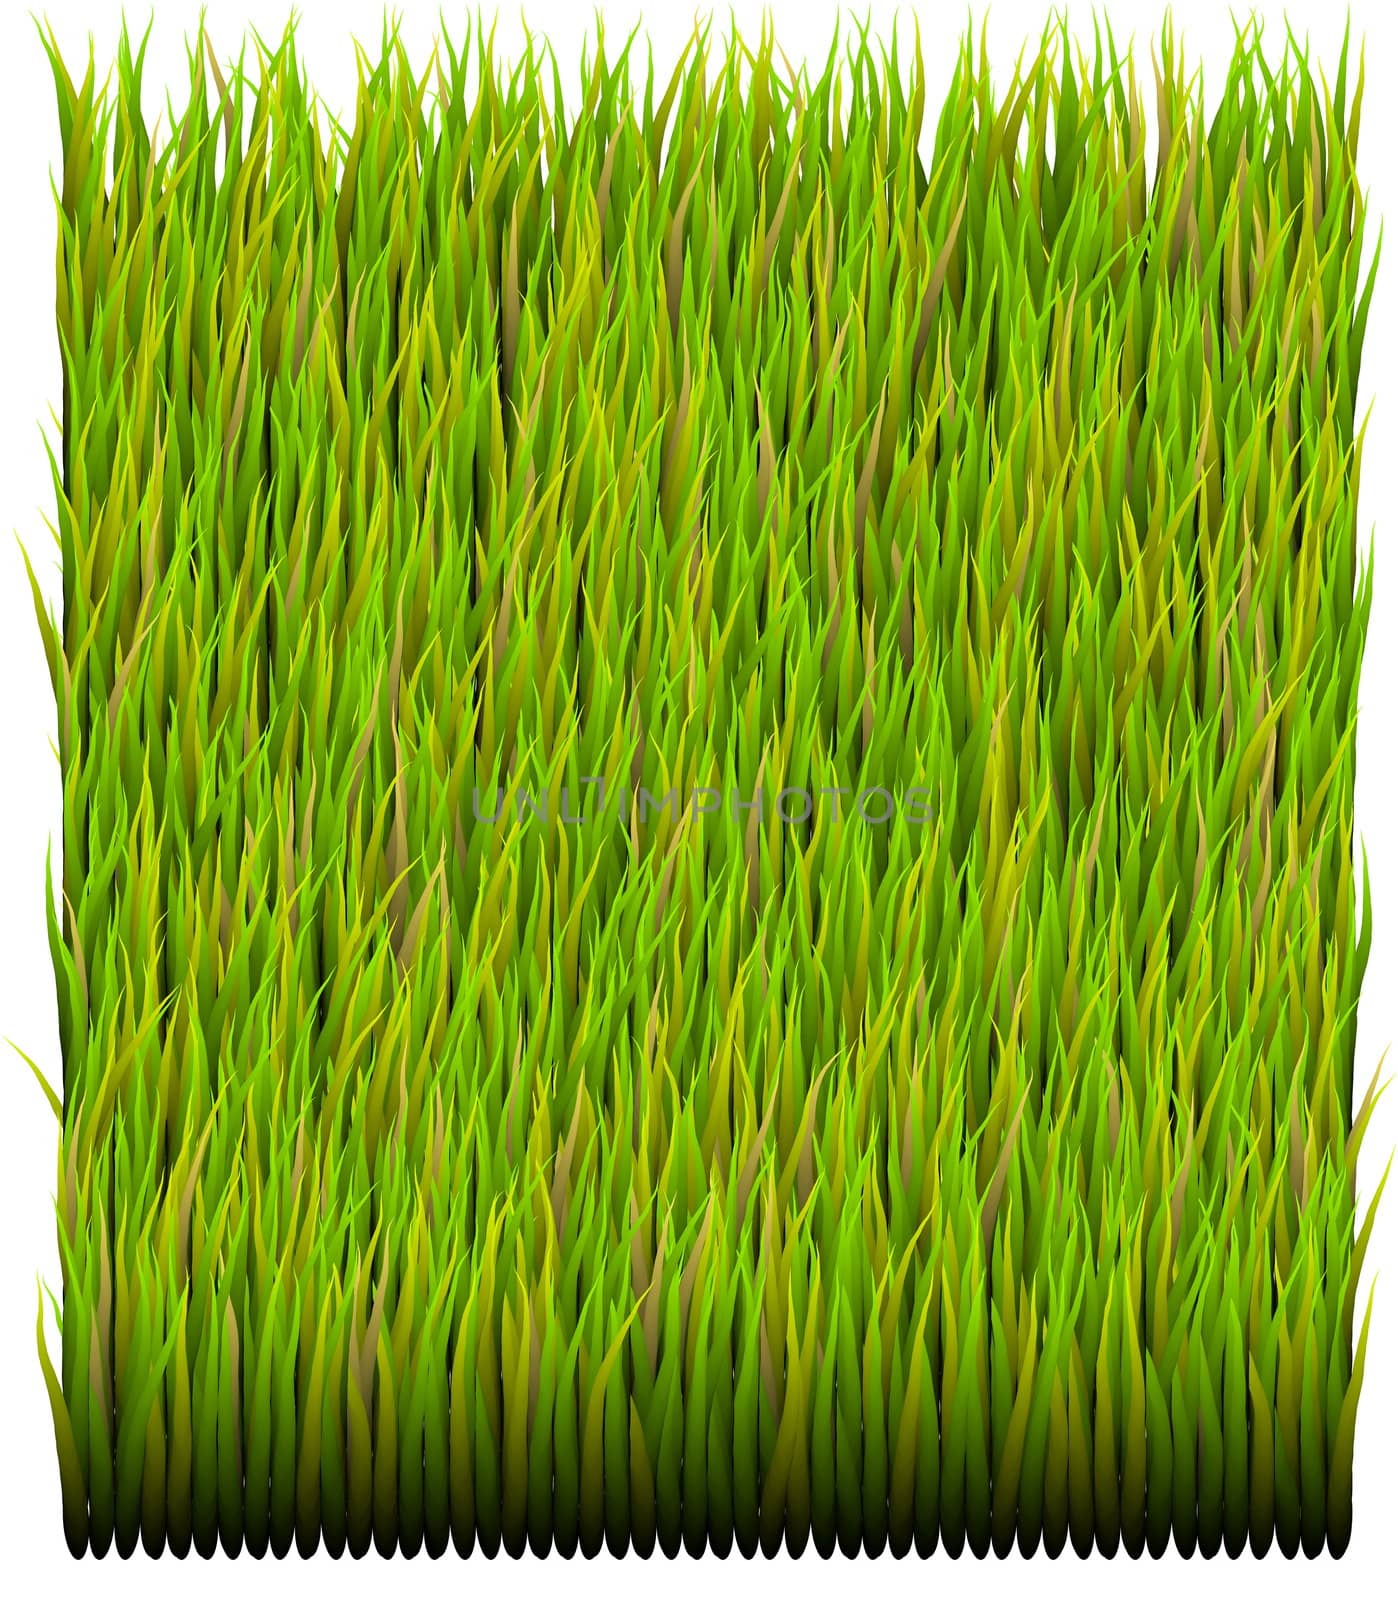 Green Grass Patch Background by kentoh